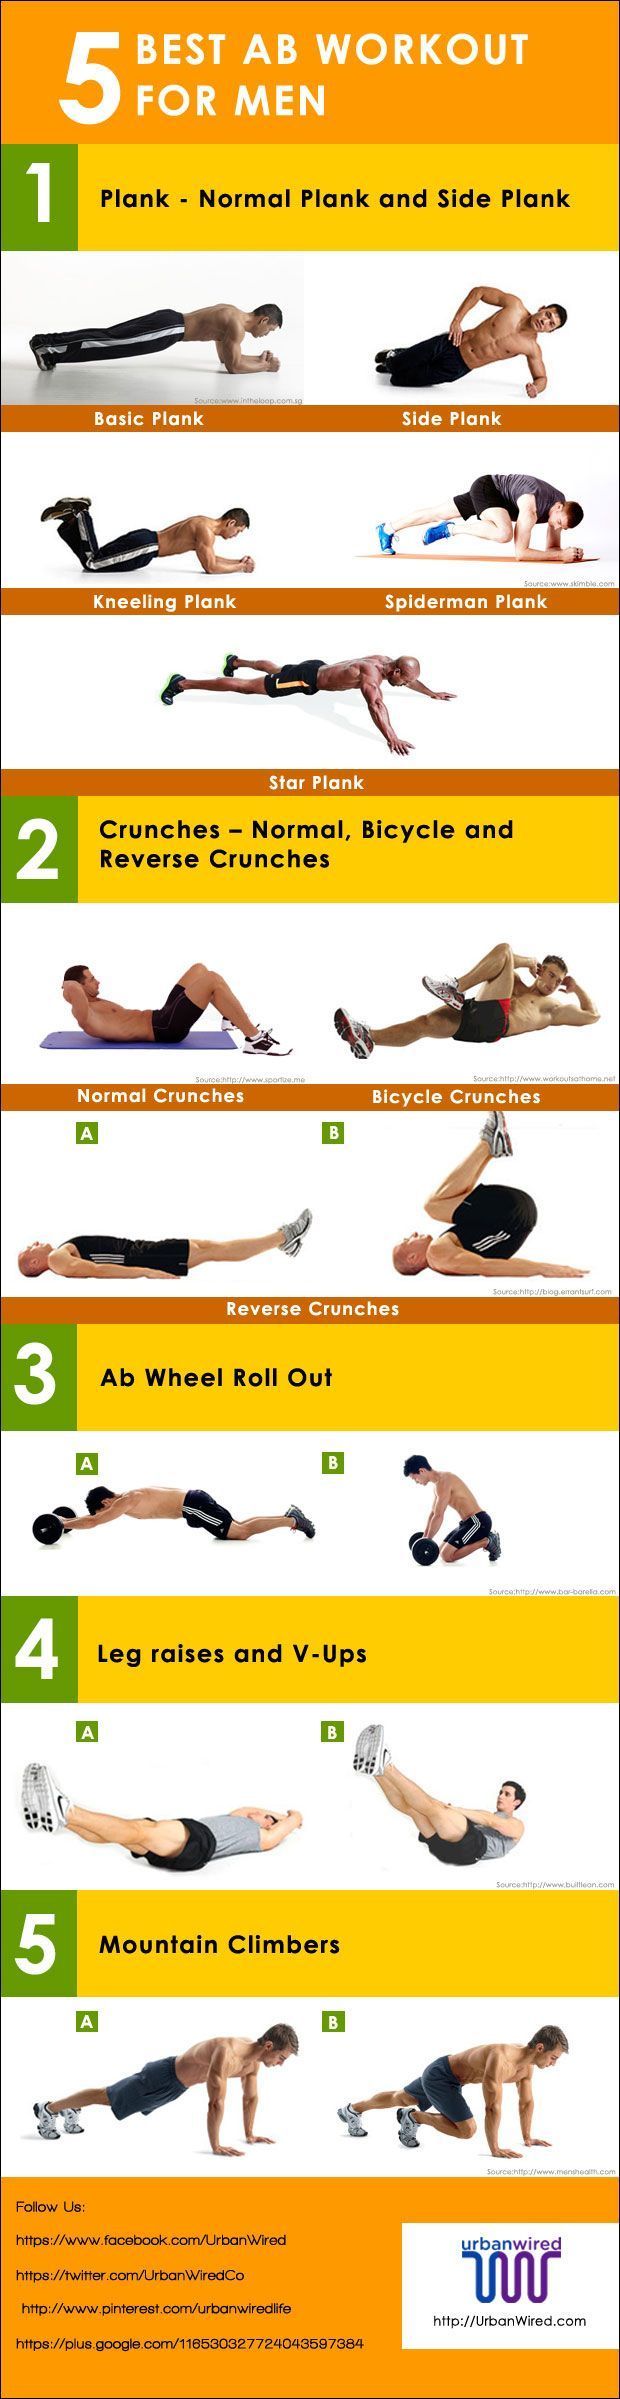 It is extremely desirable to have a good looking physique. So Here are the top 5 Best Ab Workouts for Men. Take a Look at these Best Ab Workouts for